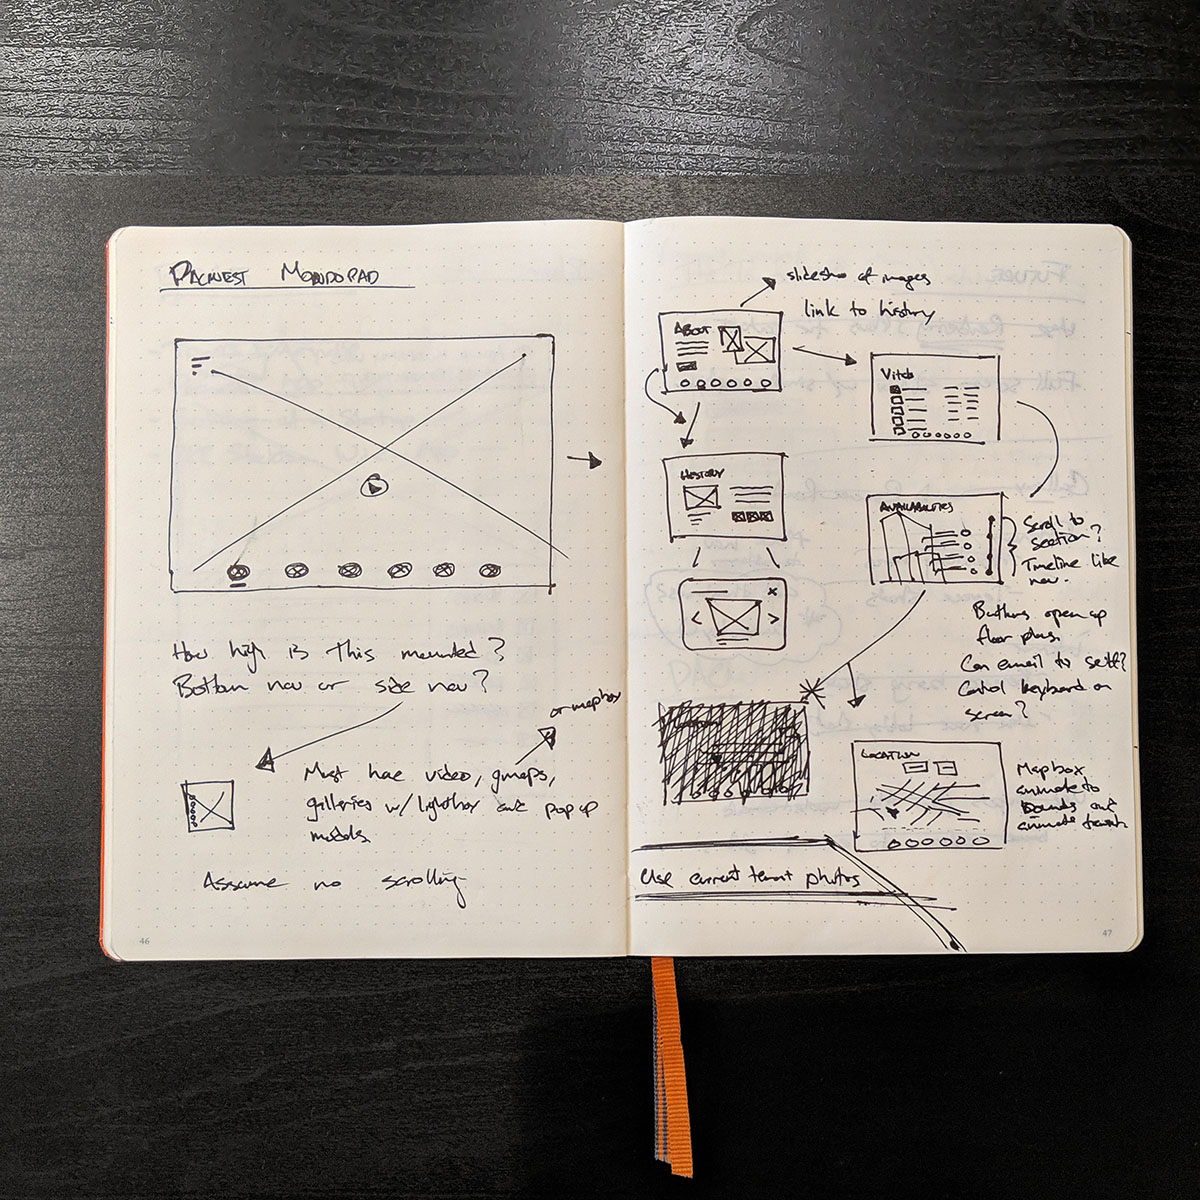 Initial sketch of app home screen and user flow through rough content